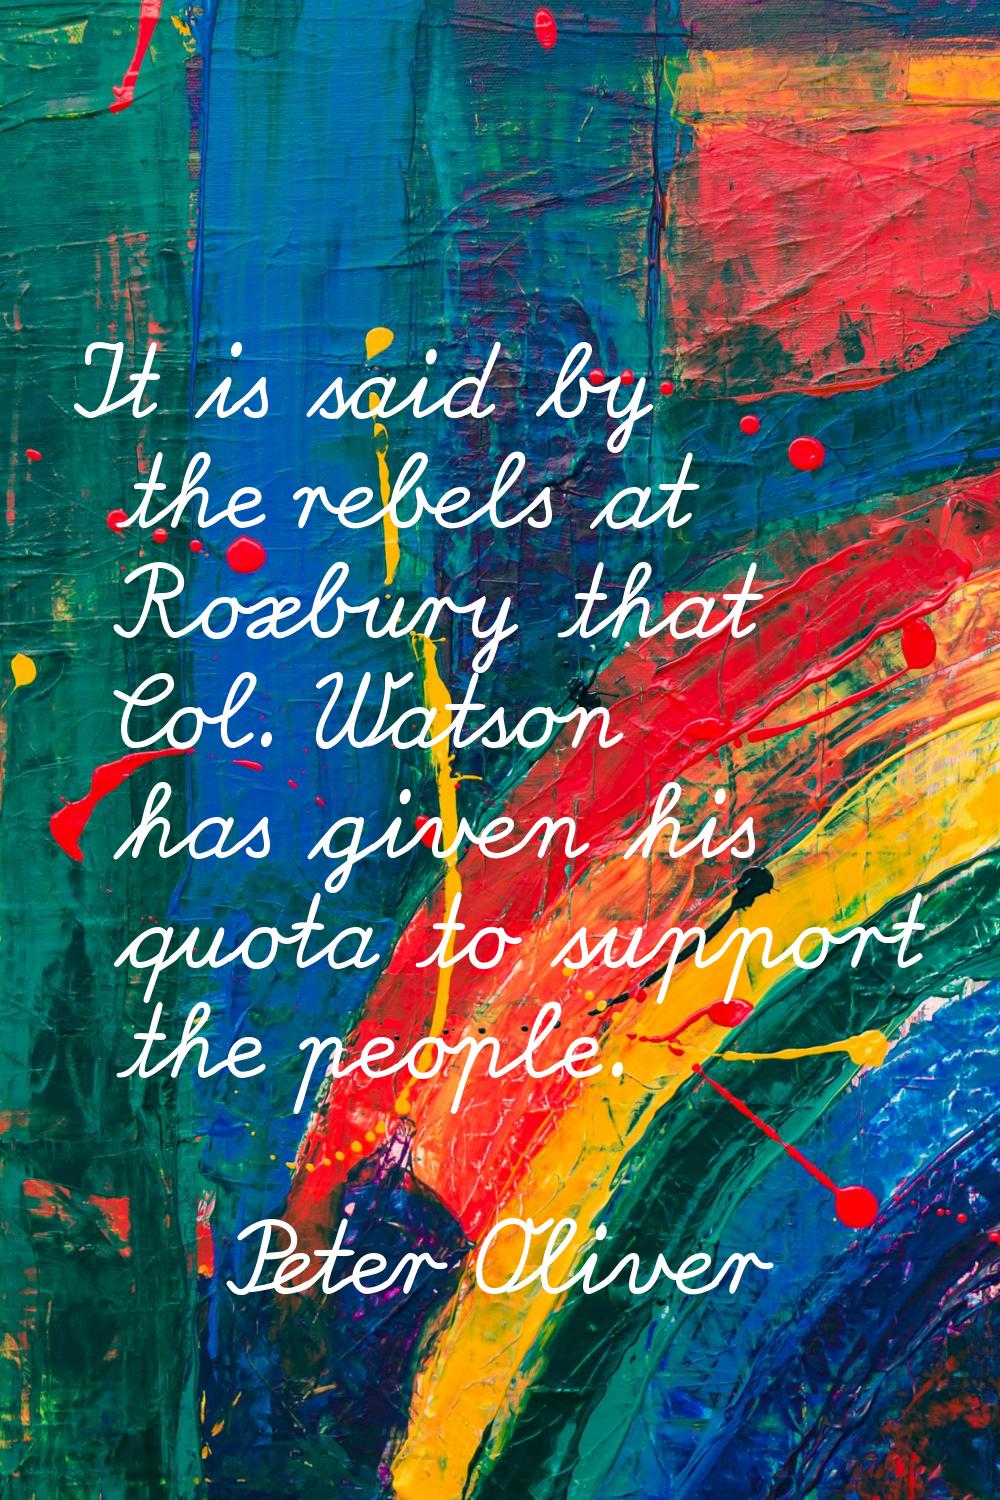 It is said by the rebels at Roxbury that Col. Watson has given his quota to support the people.